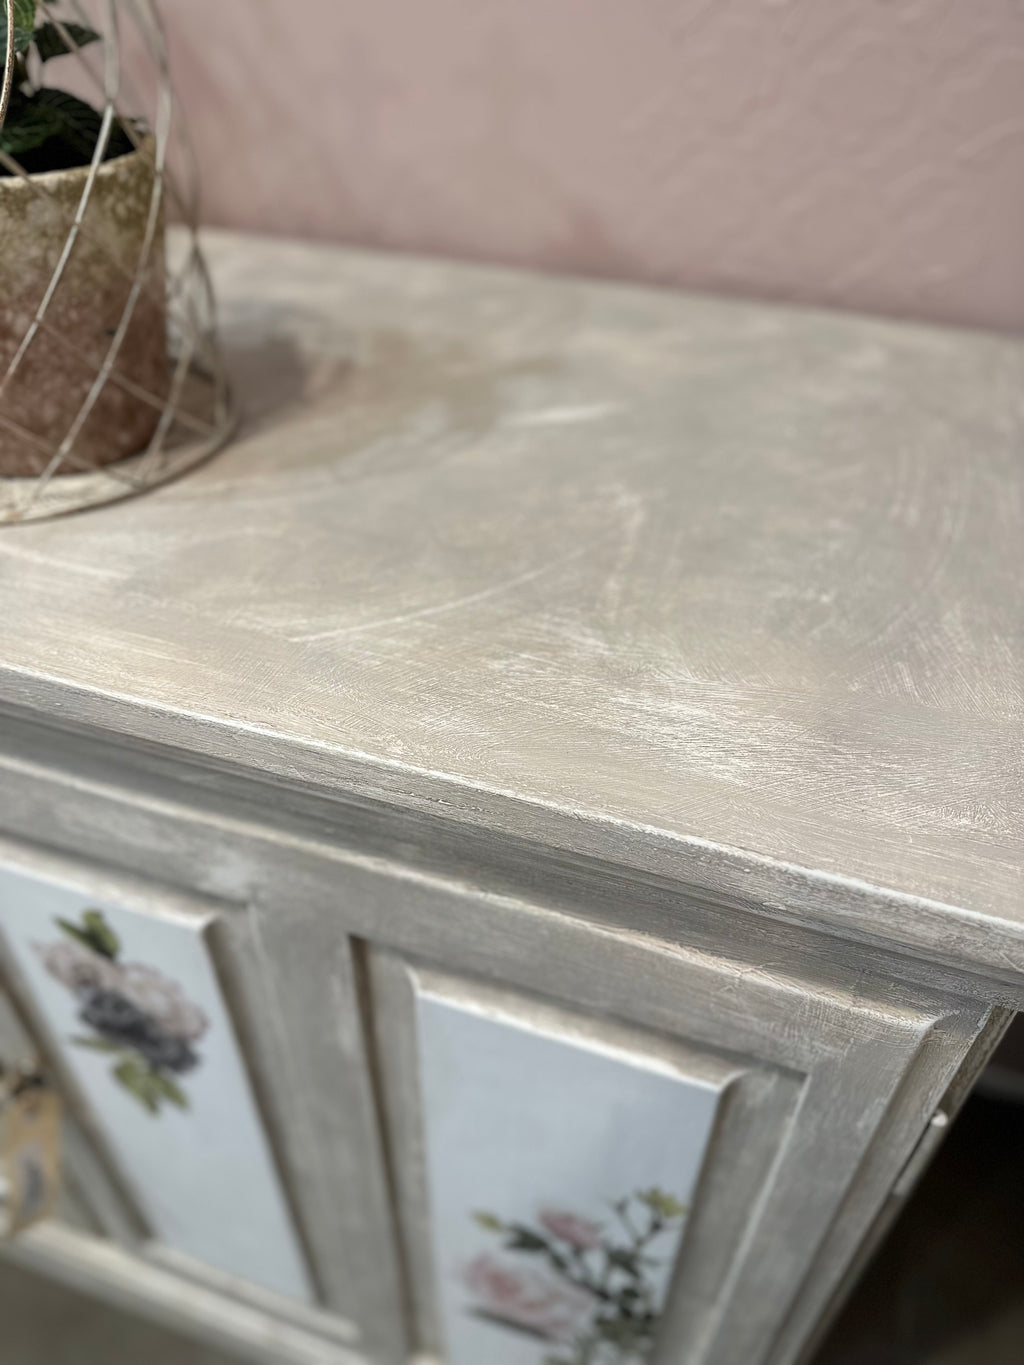 Using the Chateau method layering paint and wax has created this unique Olde Worlde look on this solid sideboard. Shades of grey, white and floral transfers complete the look, Dimensions approx 900mm height x 1200mm length.